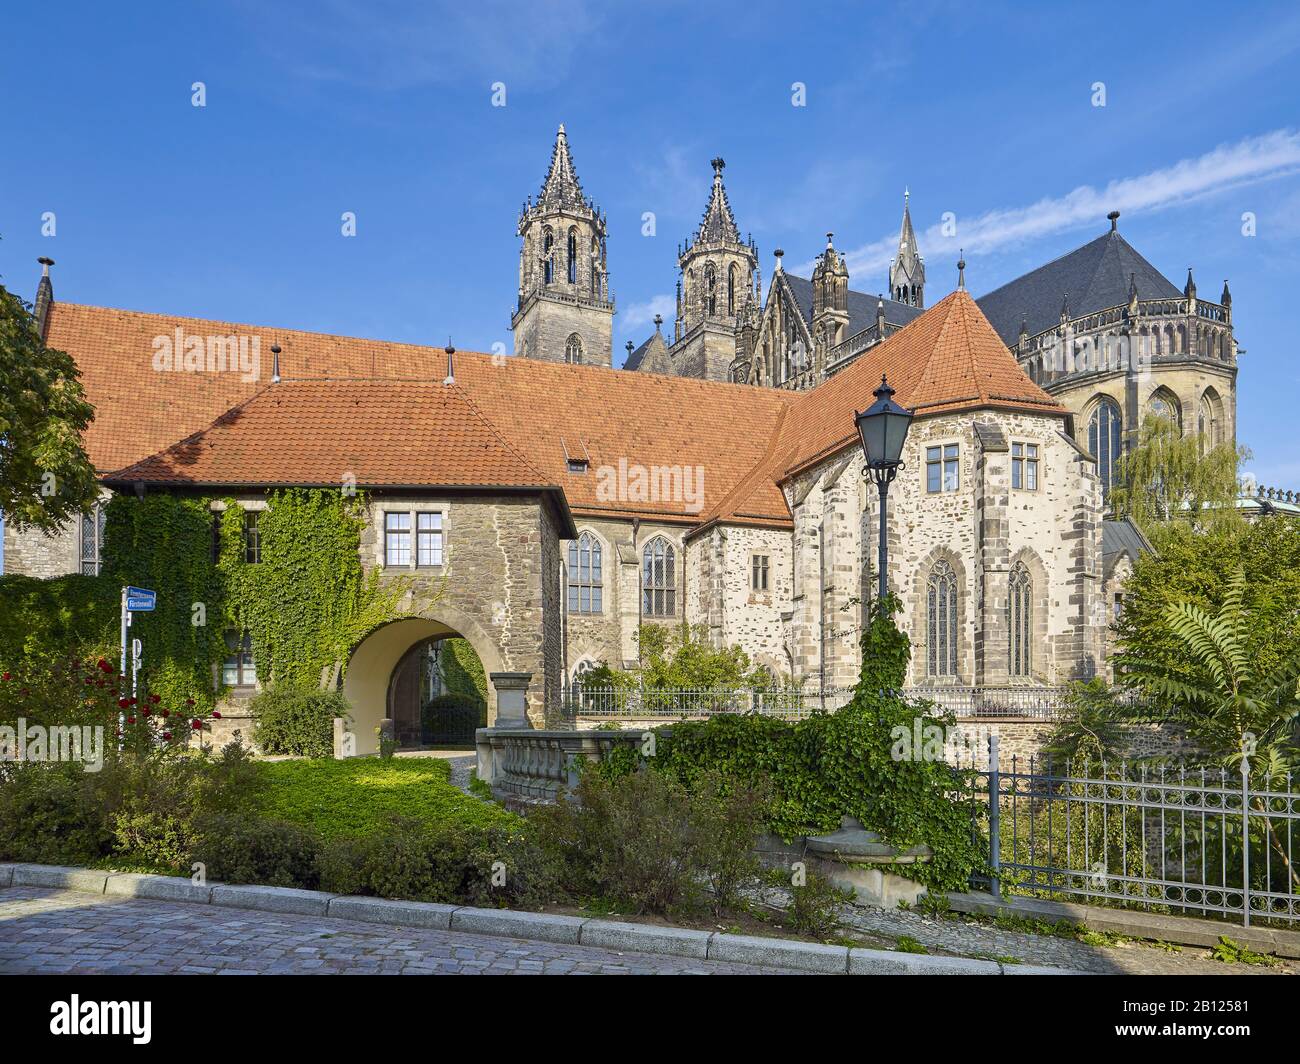 Cathedral of the Fürstenwall with Remtergang in Magdeburg, Saxony-Anhalt, Germany Stock Photo